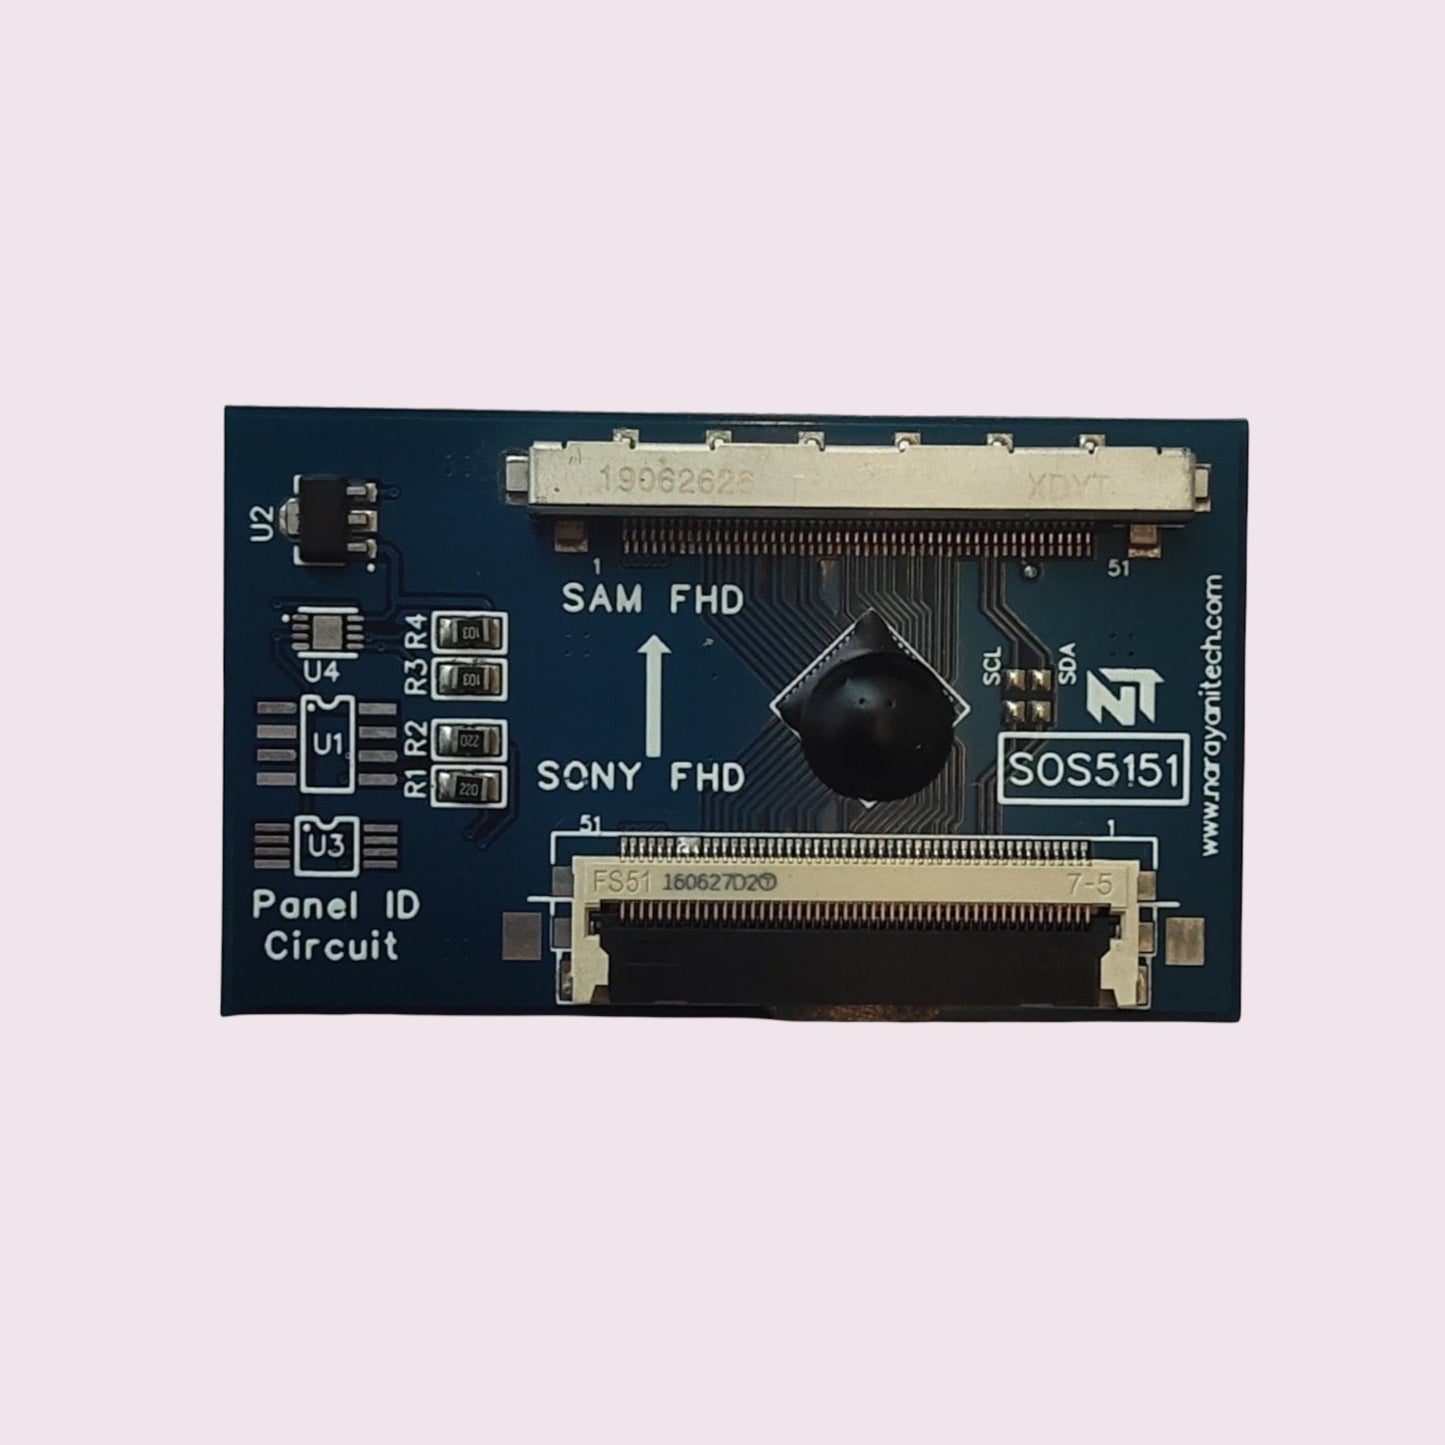 Sony to Samsung FHD 51P LVDS Interface Board SOS5151 - Faritha